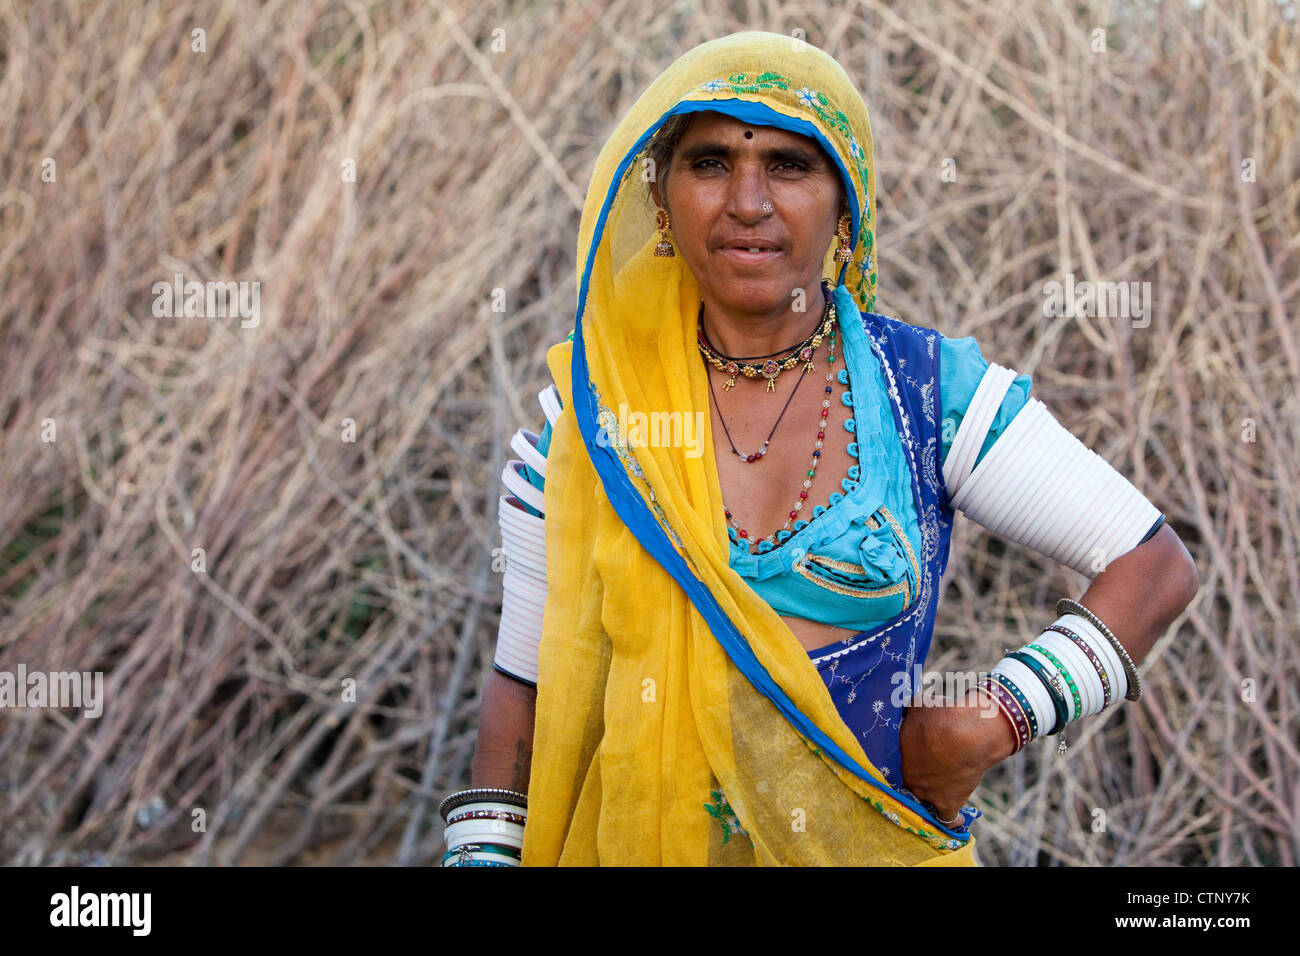 Indian woman from shepherd caste in rural Rajasthan Stock Photo